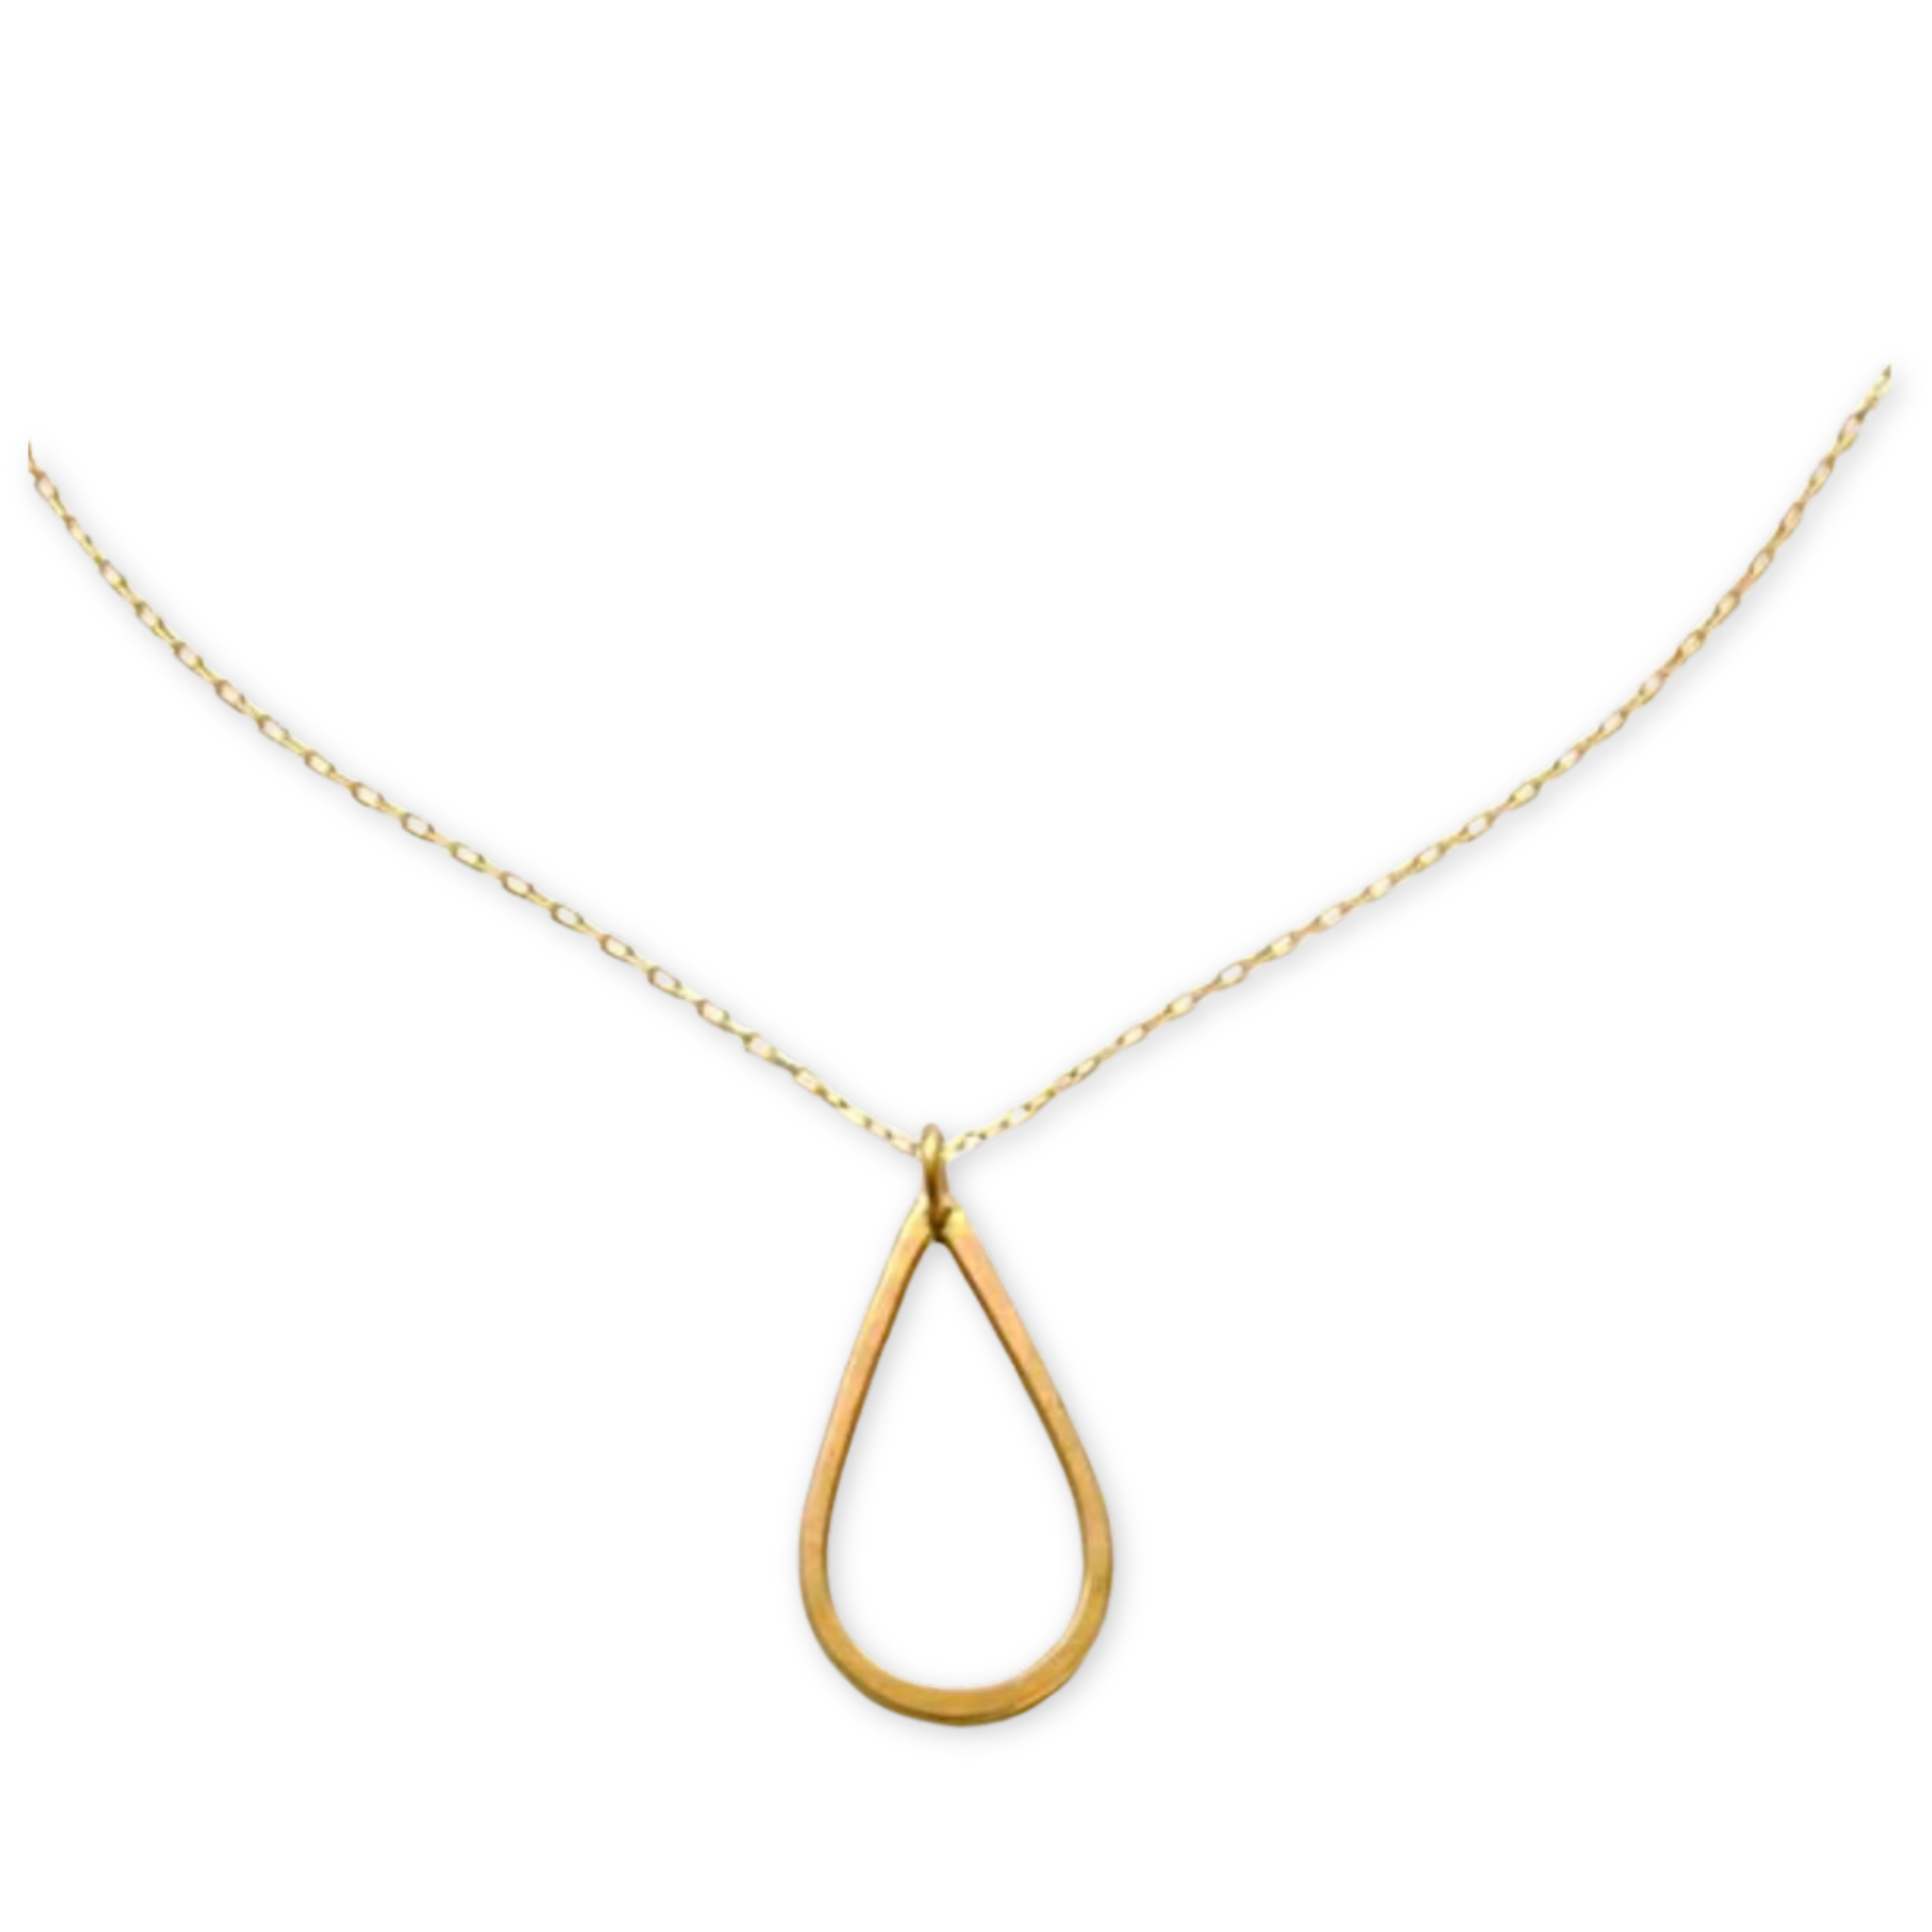 chain necklace with a simple thin tear drop cut out pendant